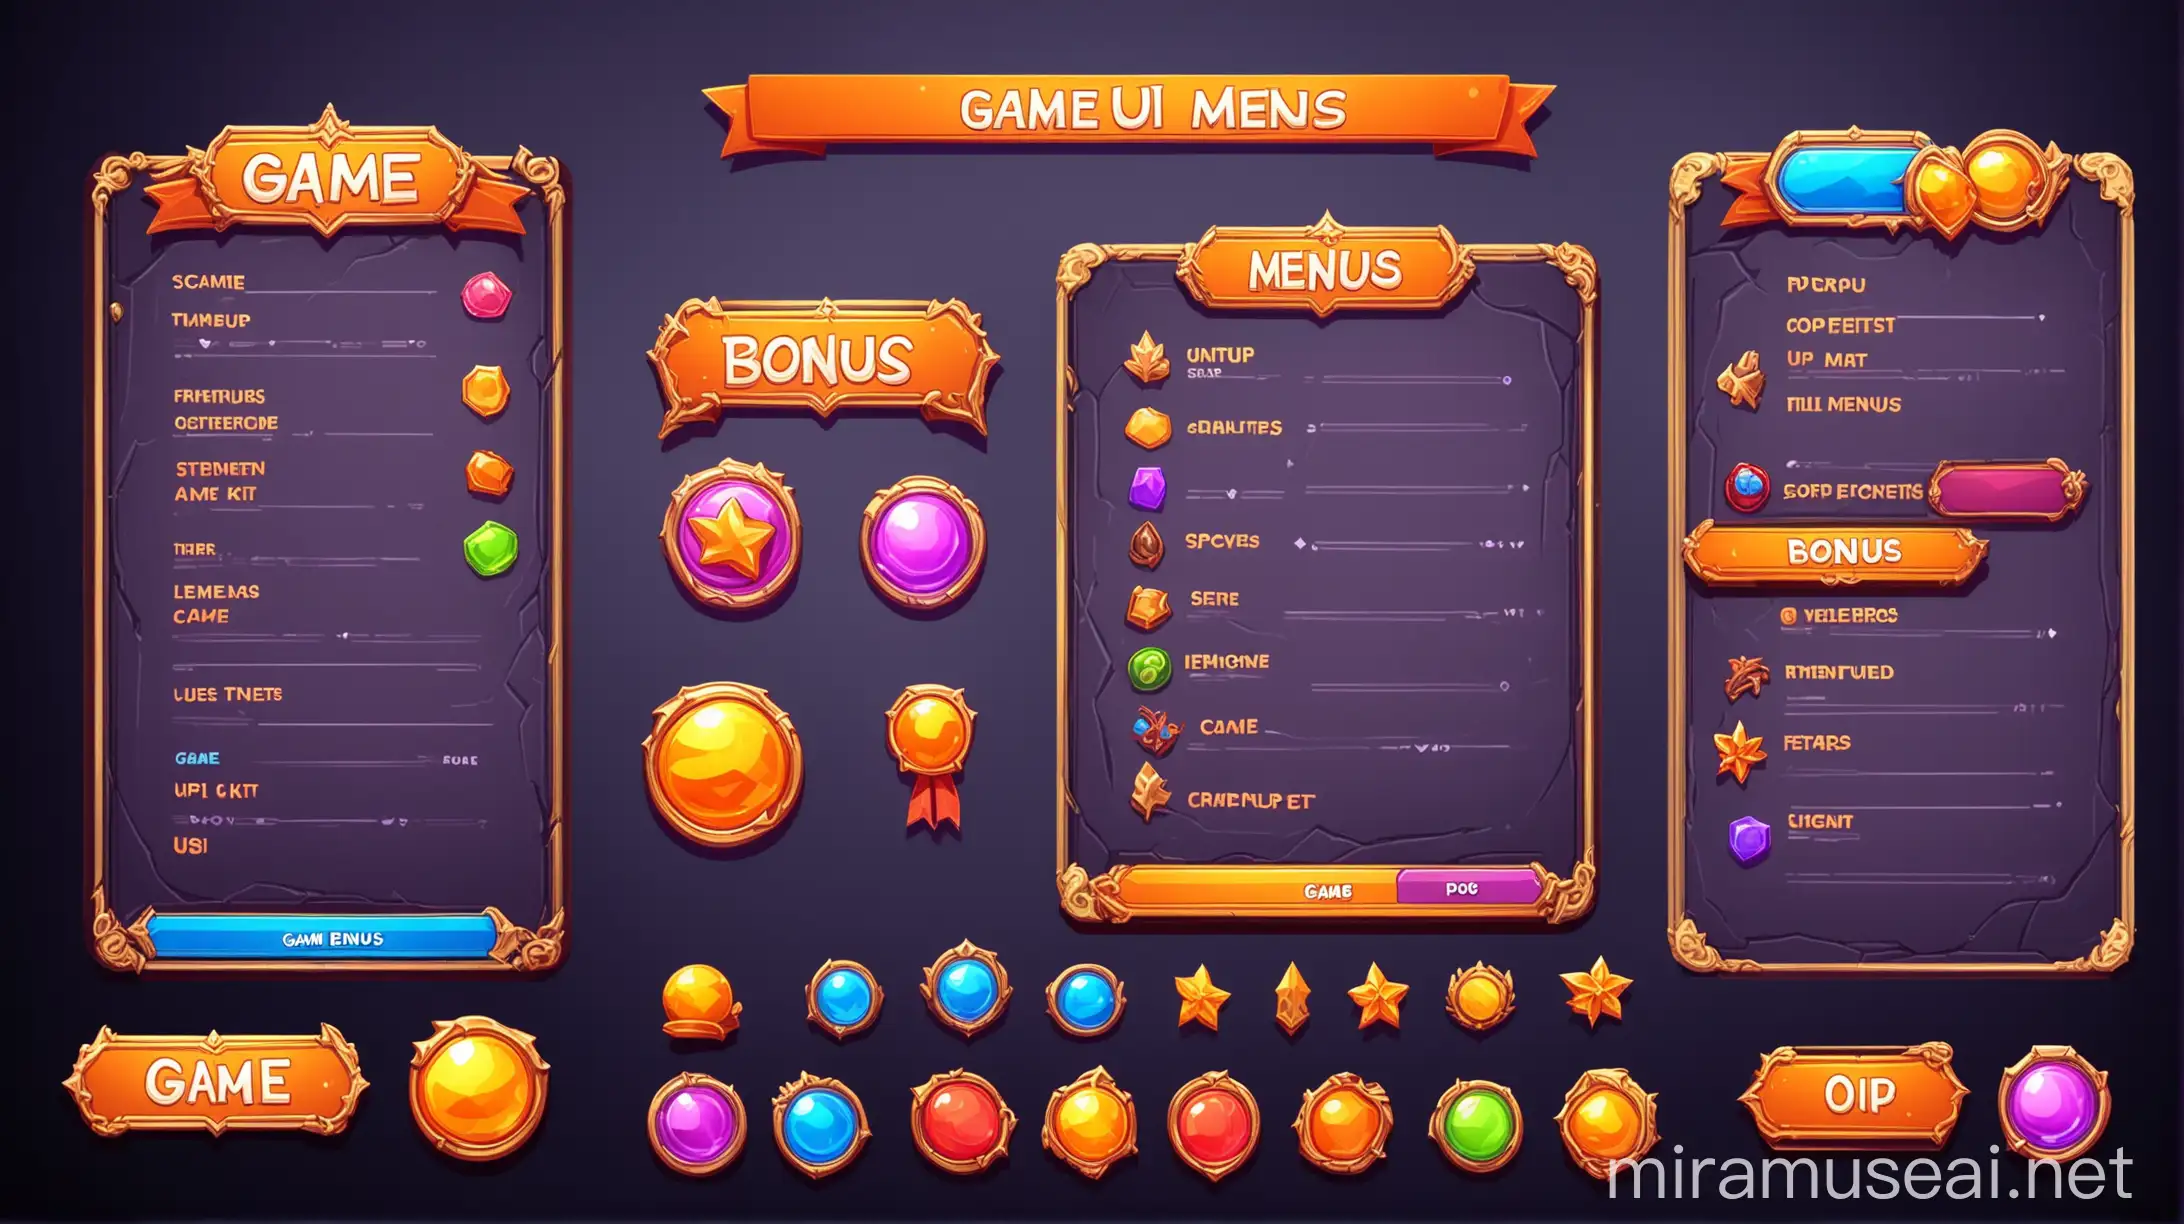 Game UI Kit Dynamic Menus and PopUp Screens with Engaging Game Elements Background